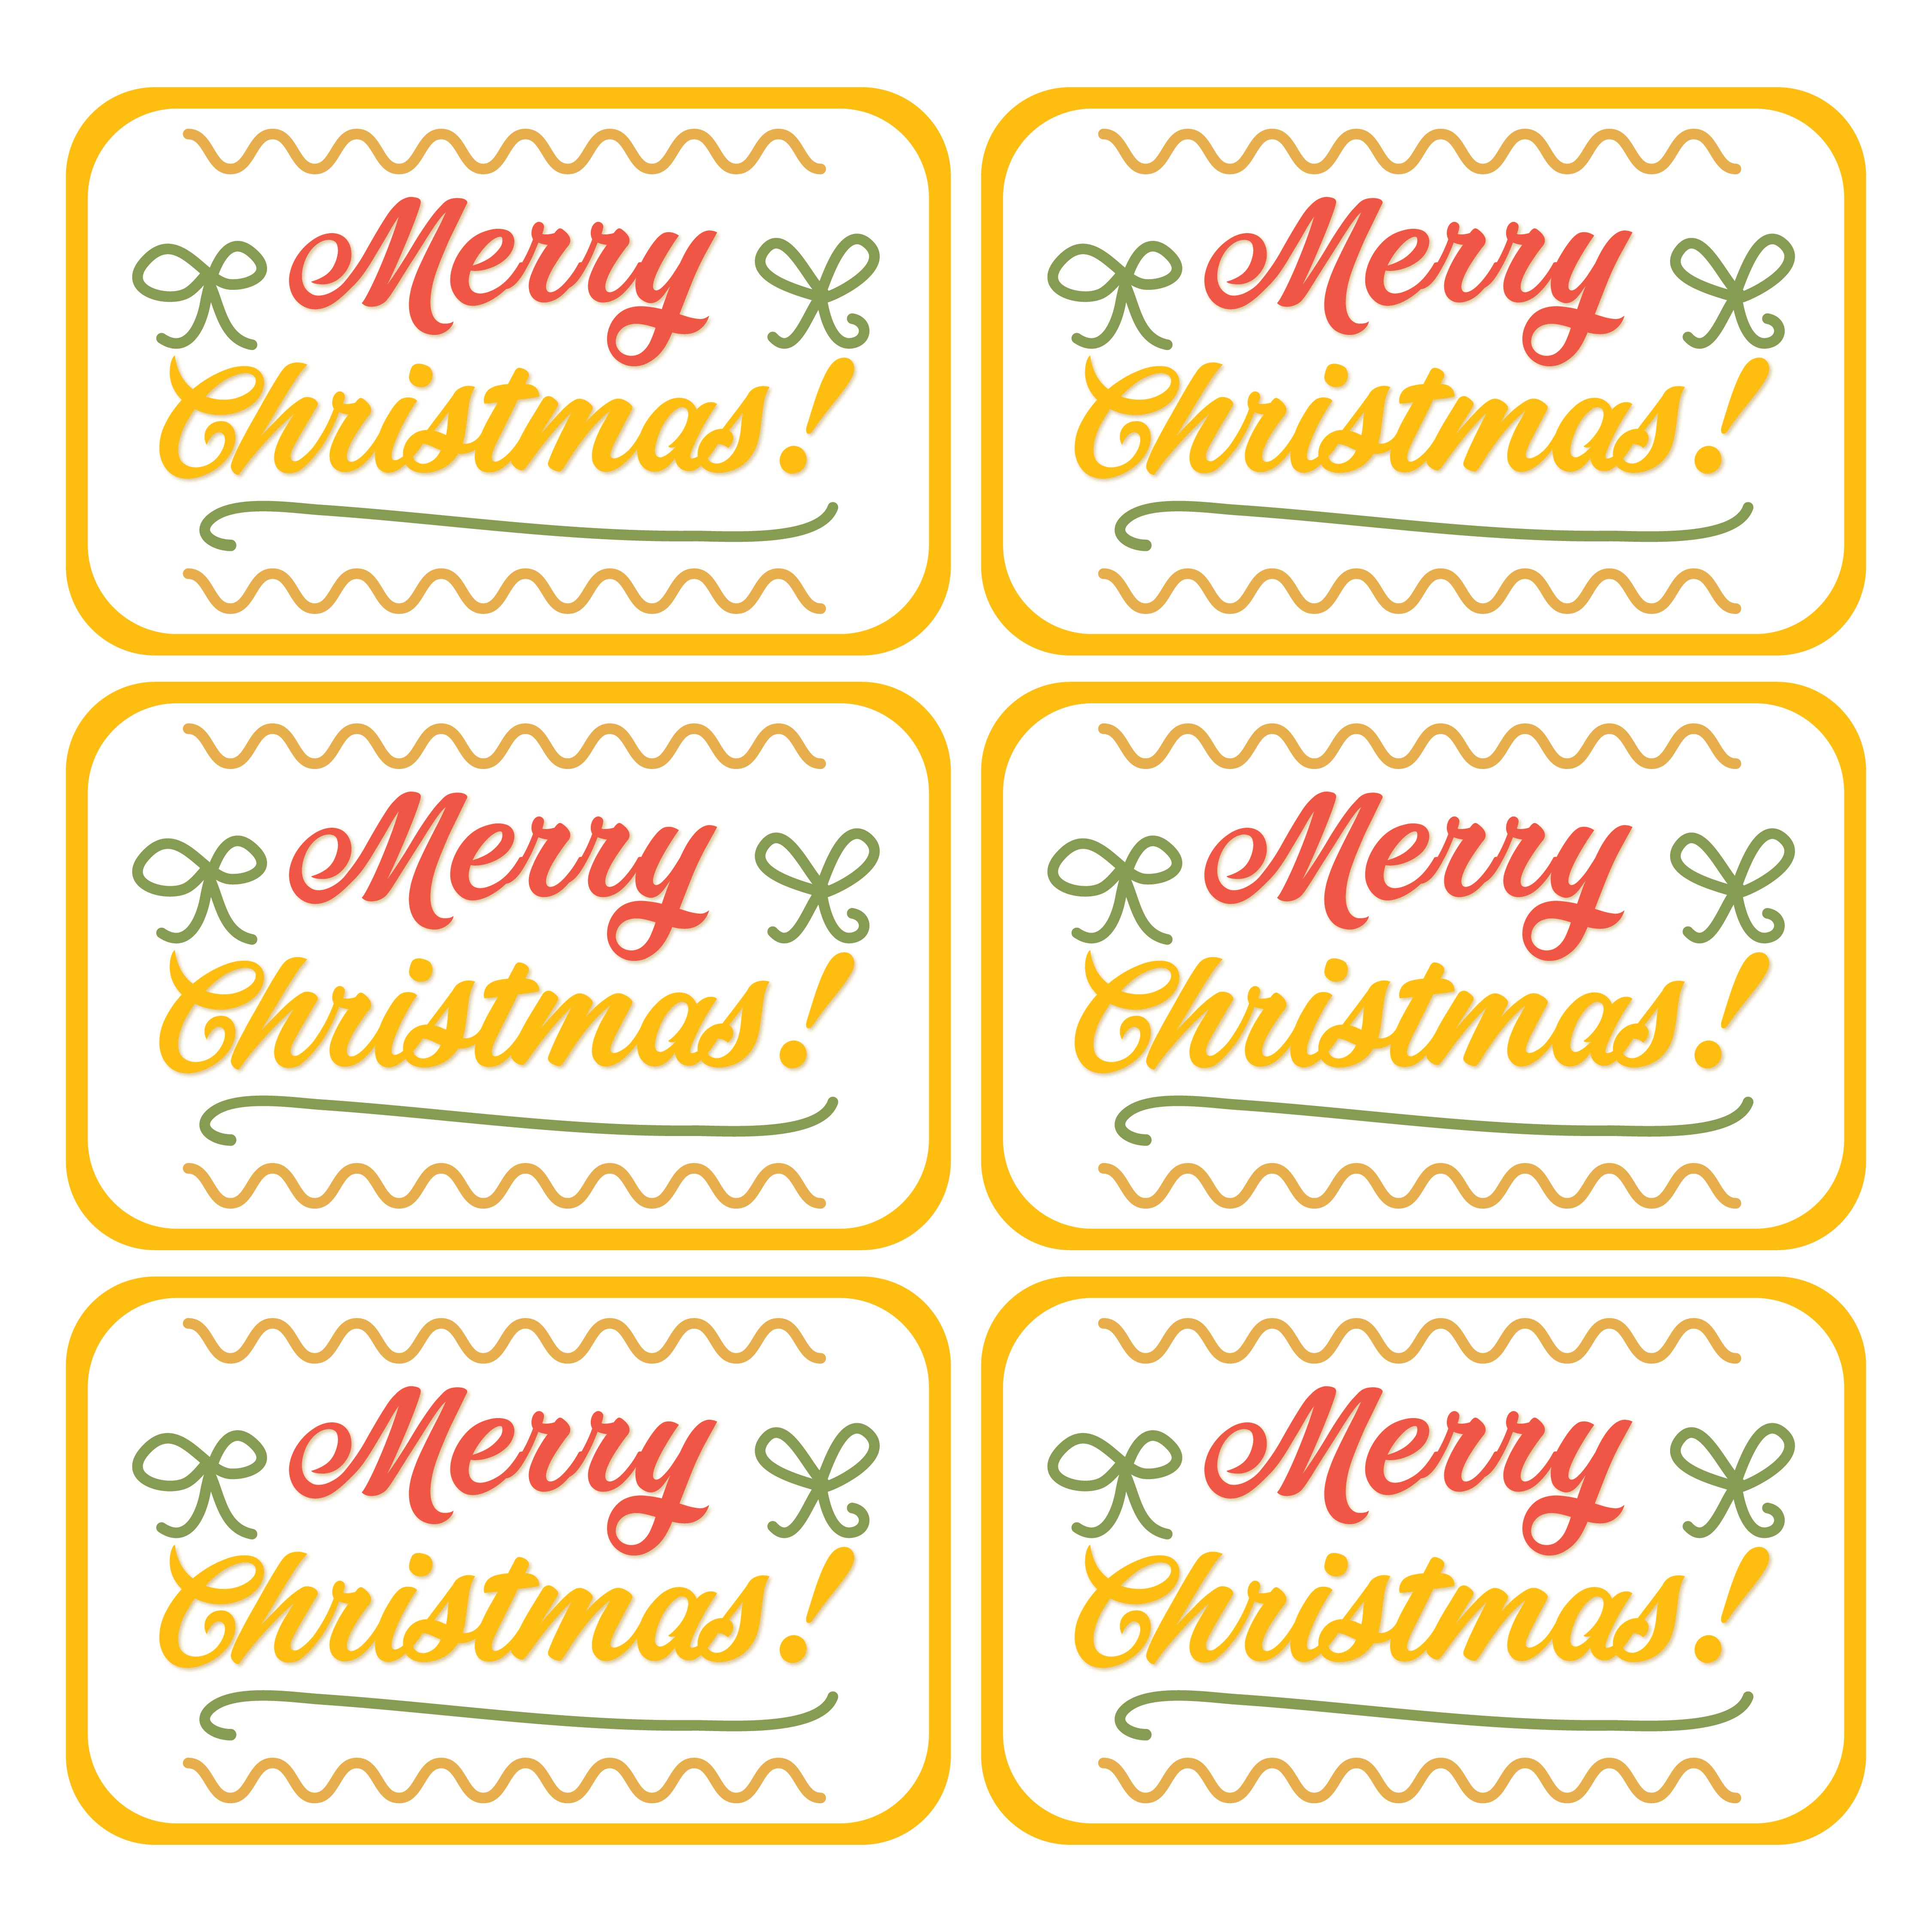 6-best-images-of-free-printable-christmas-gift-tags-pdf-free